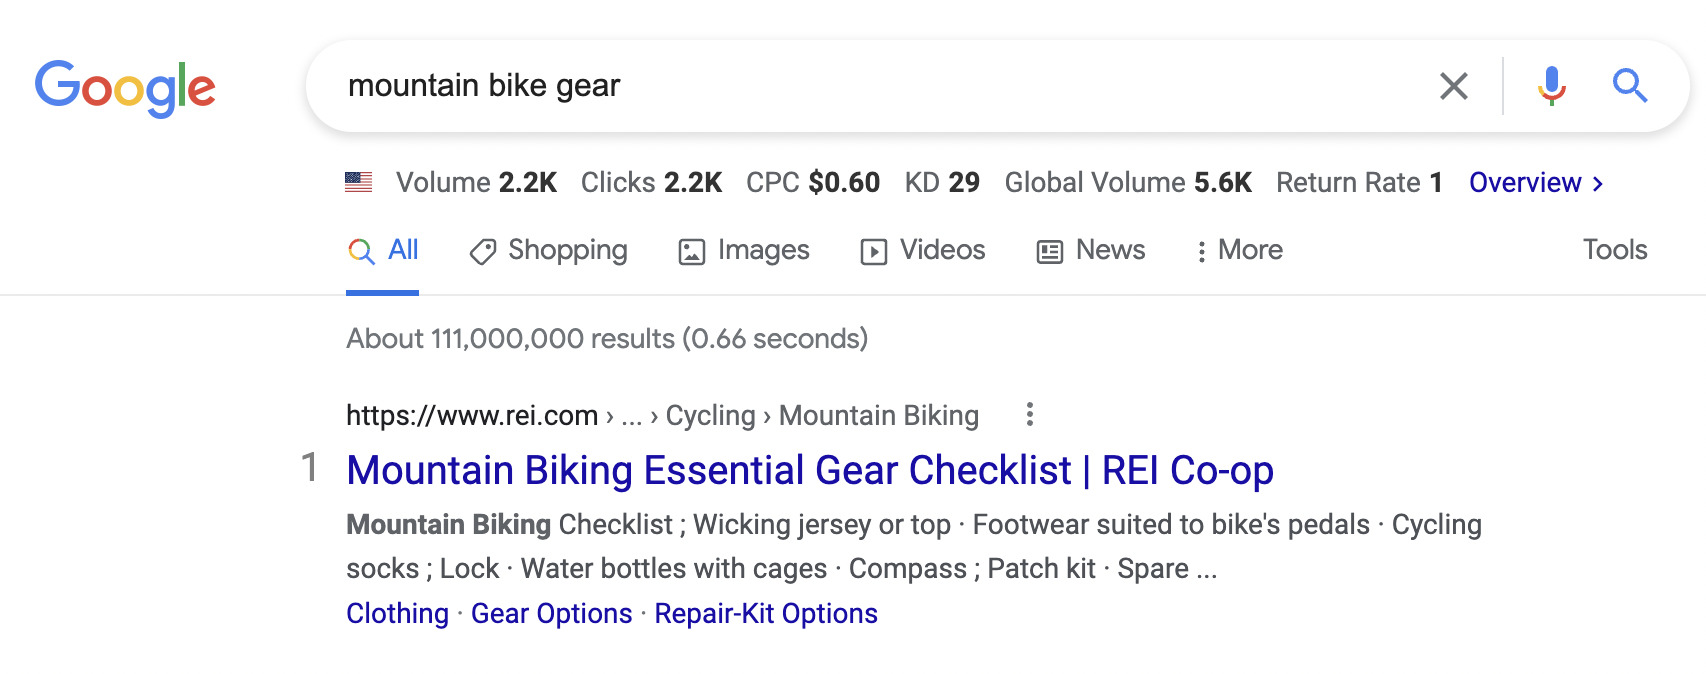 Analyzing competition for mountain bike gear on Google